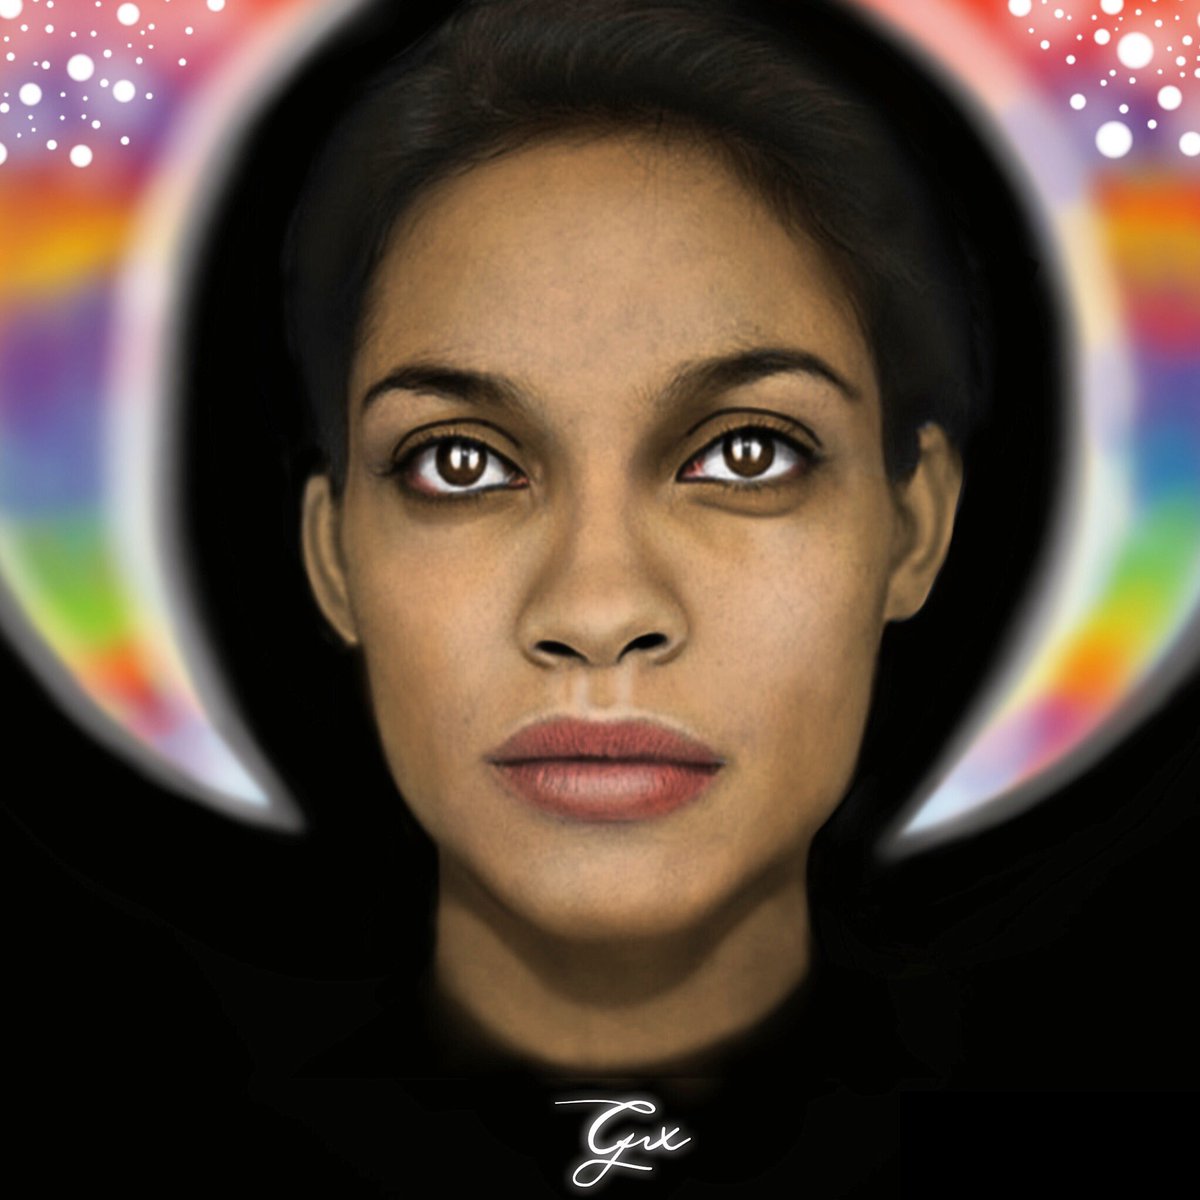 RT @Forever_Vicious: GhxstGoddess ✨✨✨
GhxstGod Gx Series????
Character: @rosariodawson 
We Are Forever Vicious Forever https://t.co/HepskRdXYz